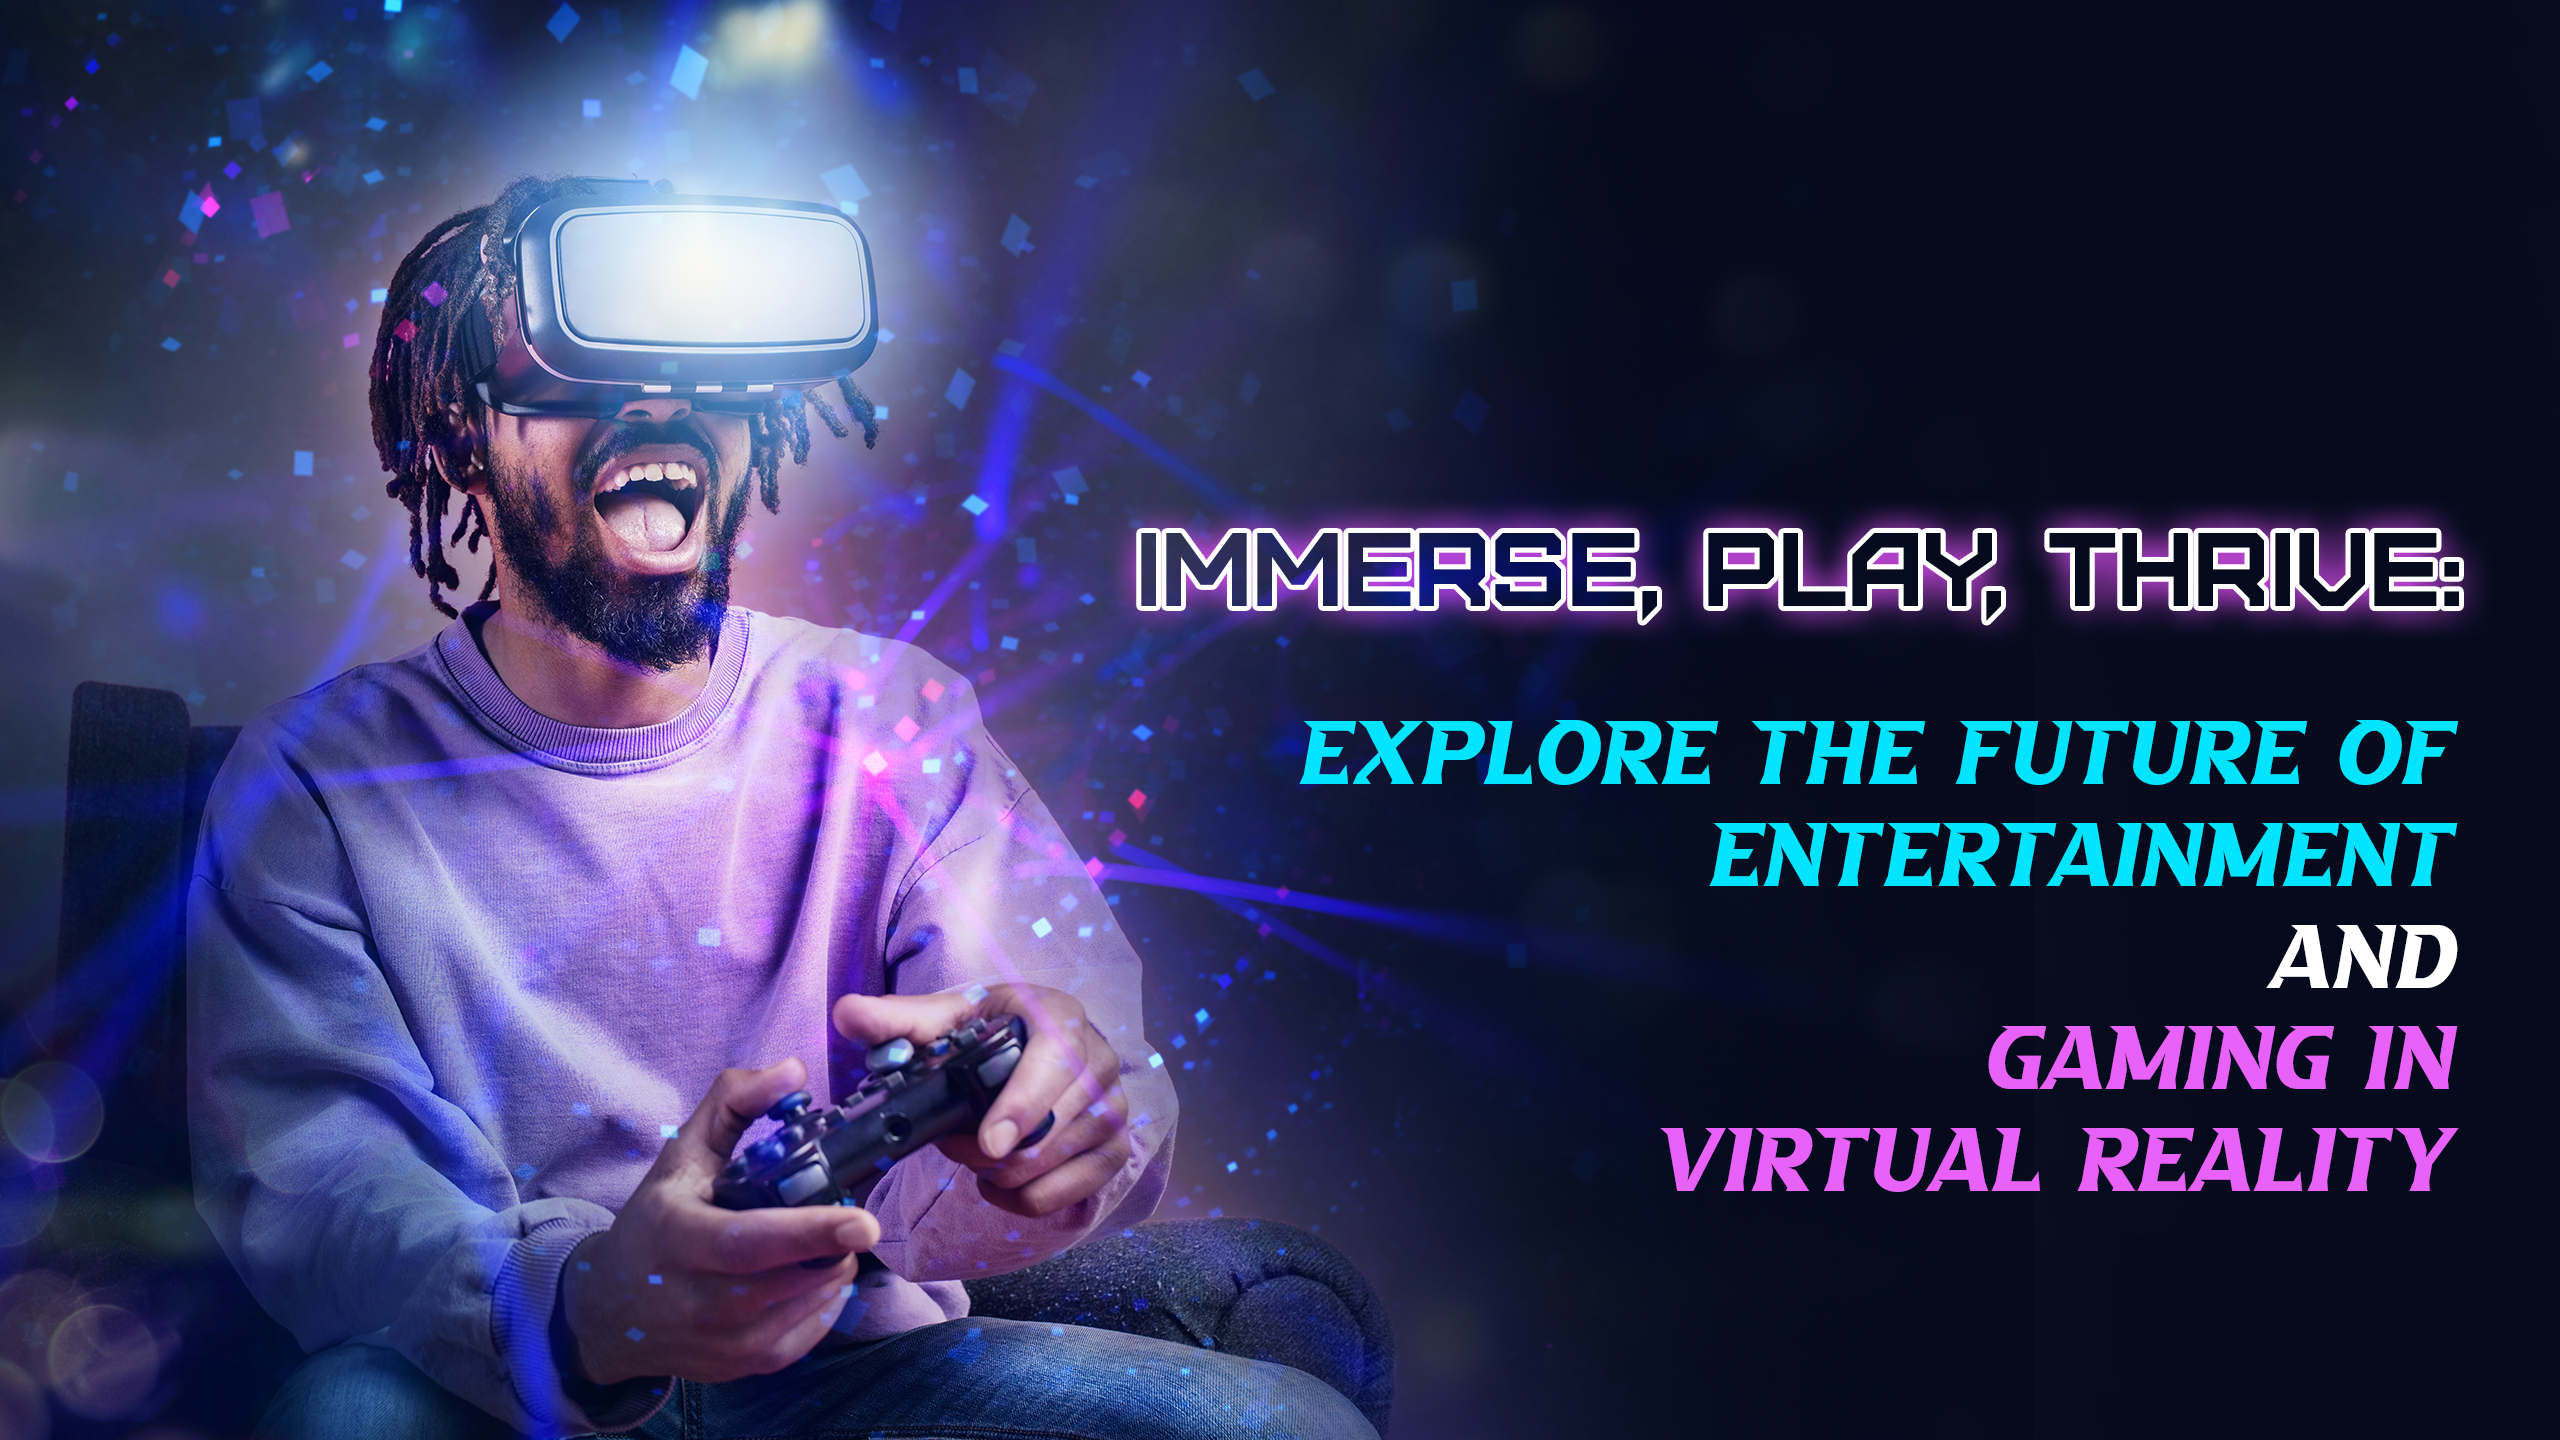 Future of Entertainment and Gaming in Virtual Reality